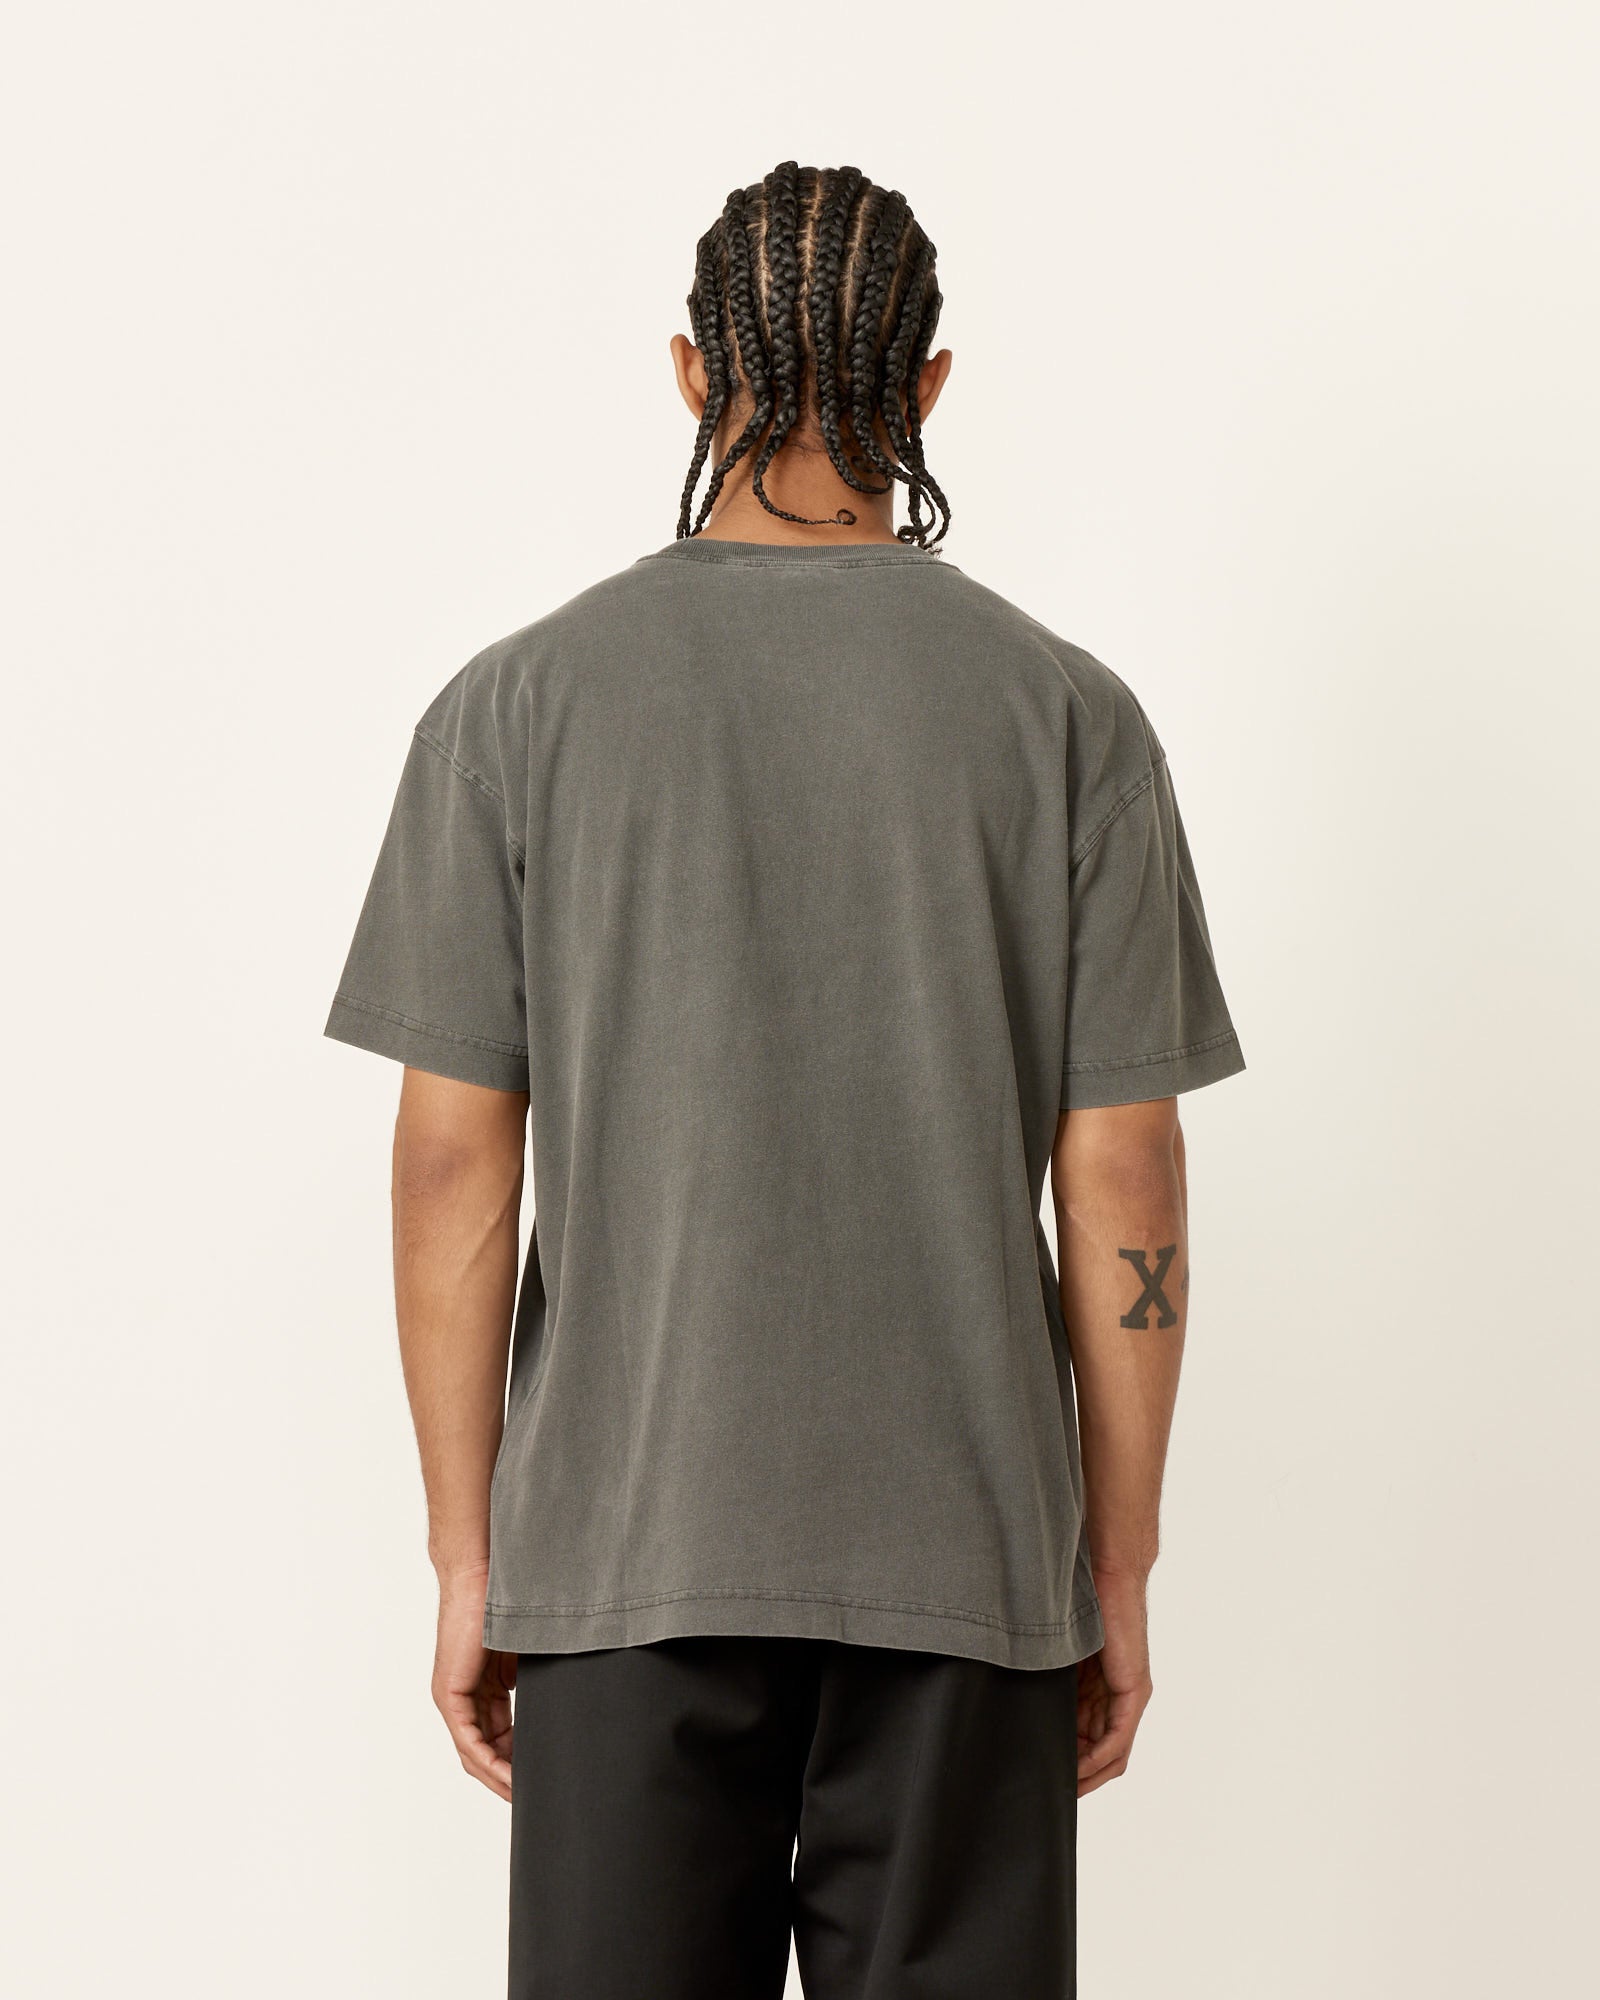 Nelson T-Shirt in Charcoal